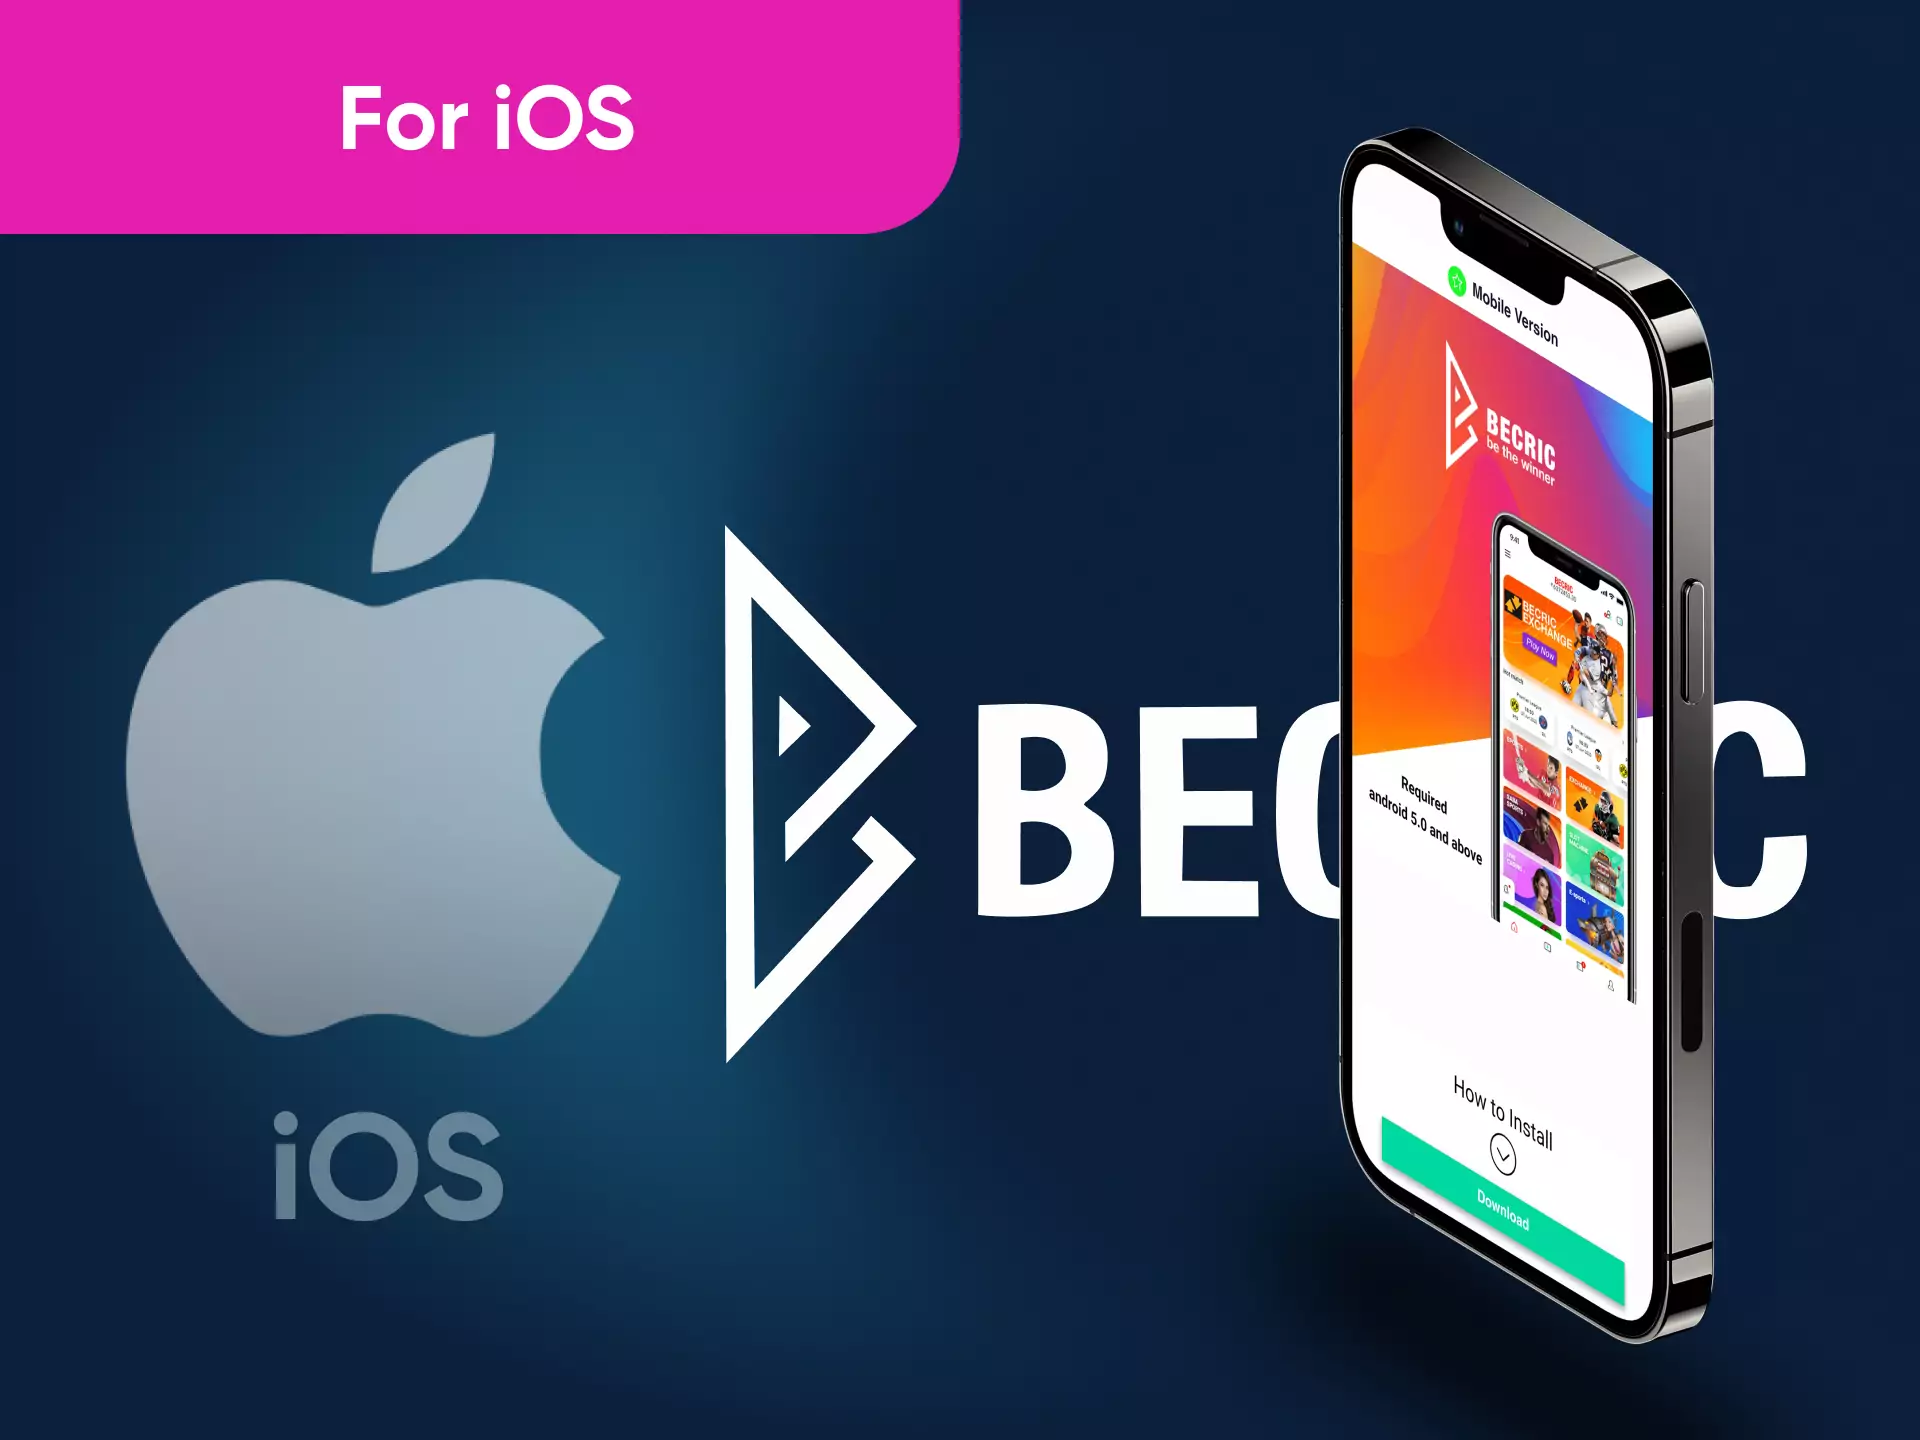 To use Becric from your iPhone, you can install the app for iOS devices.